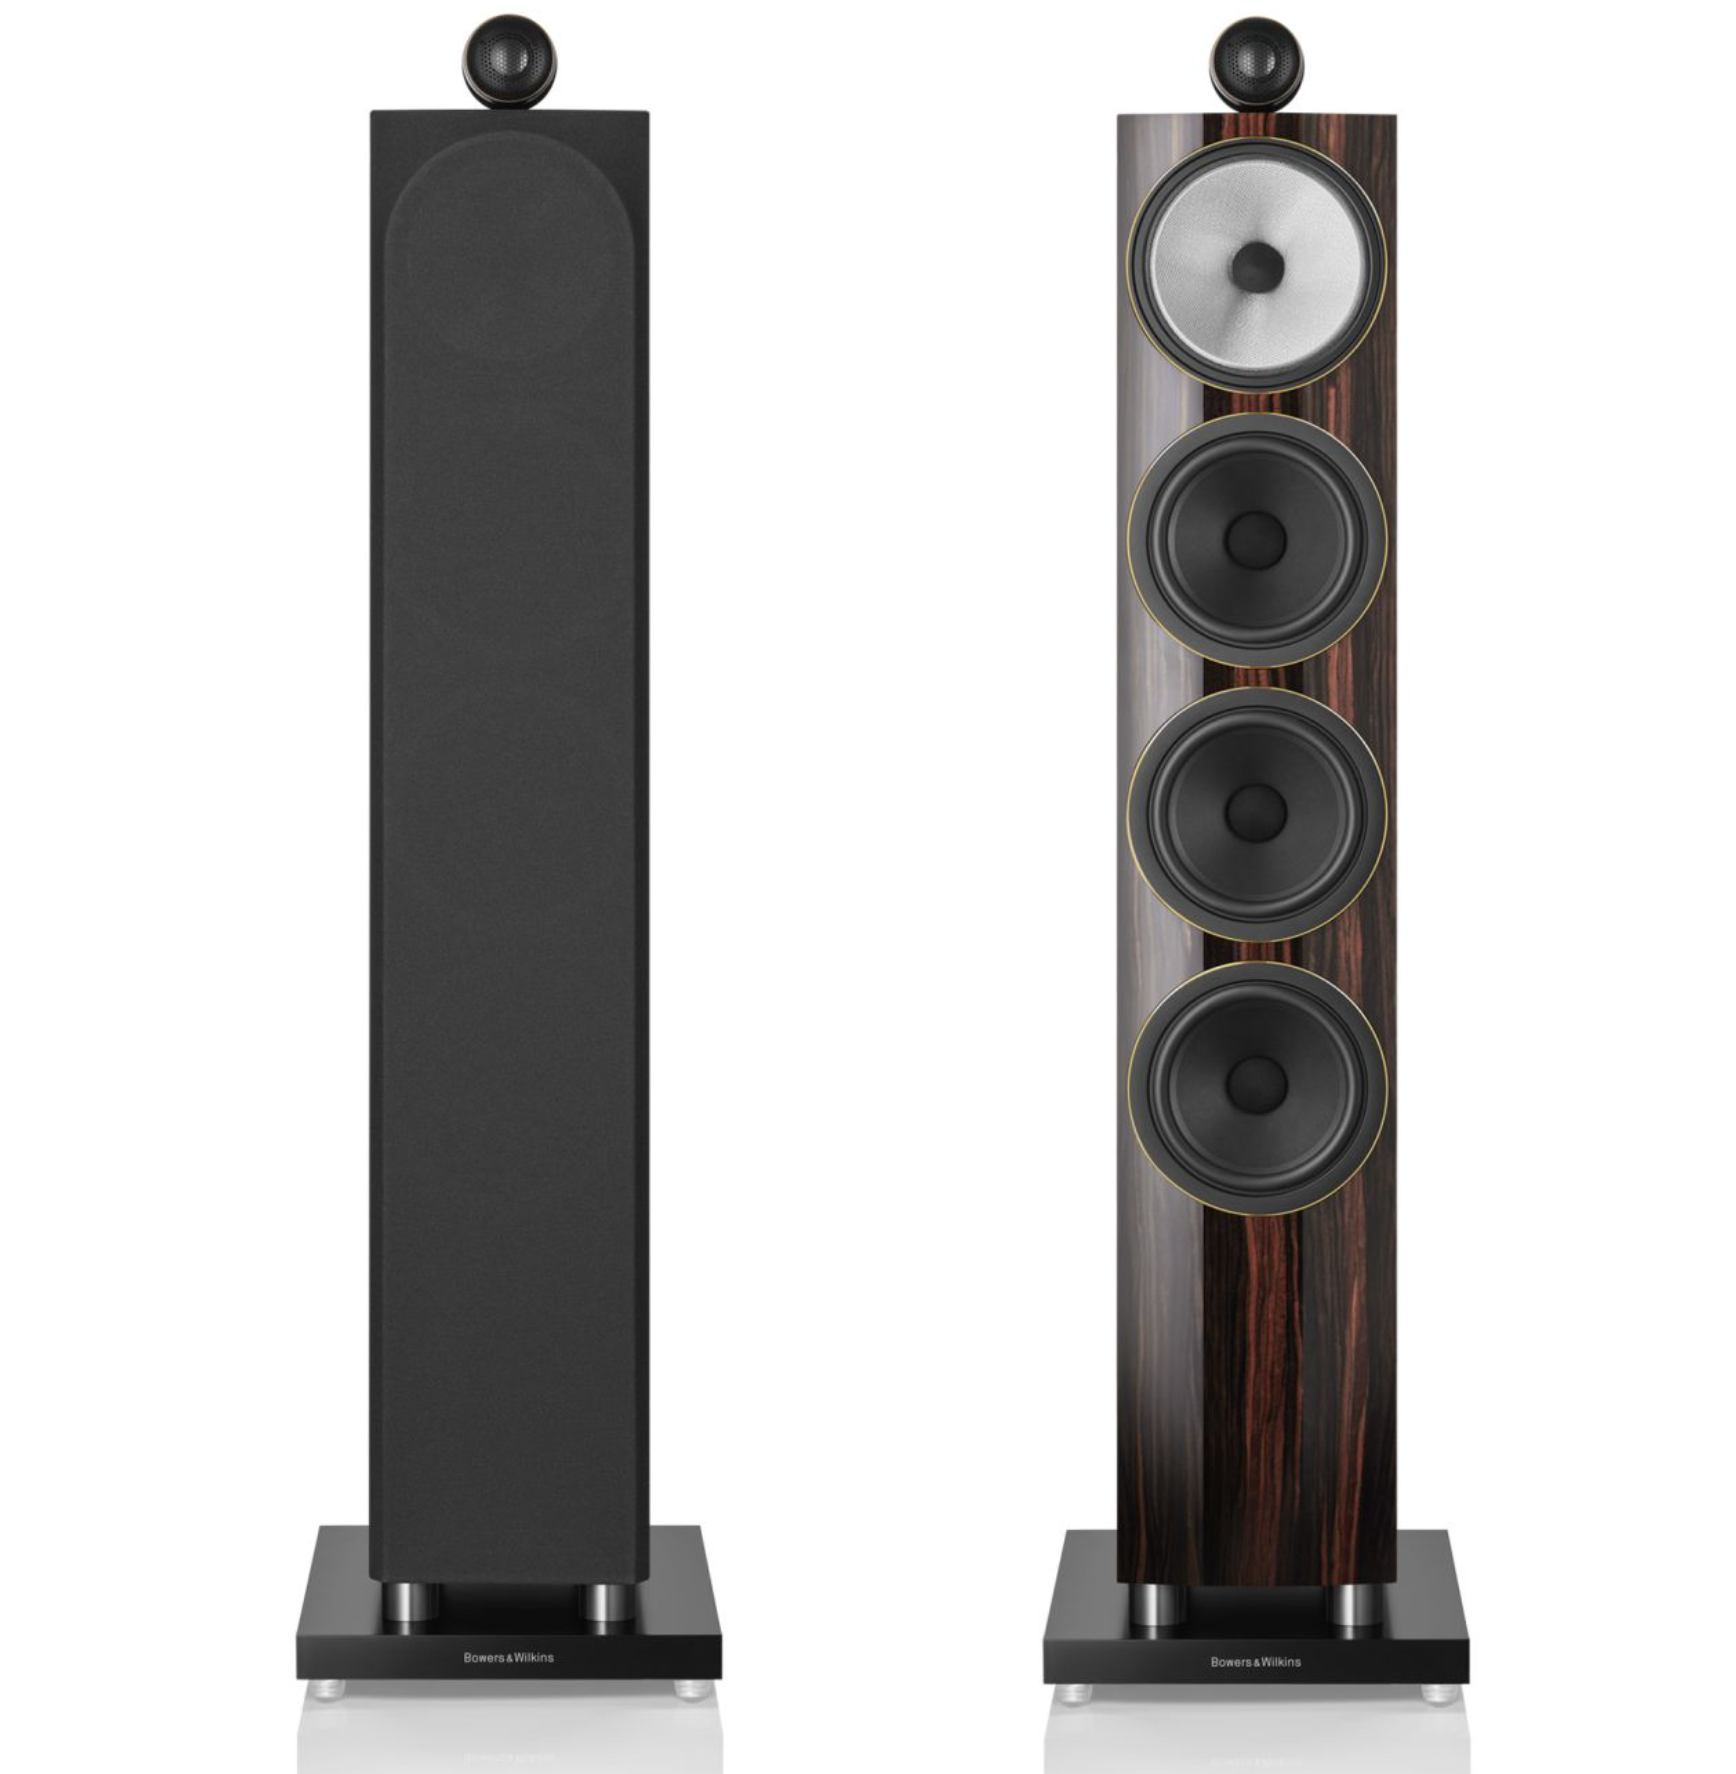 Bowers & Wilkins 702 S3 Signature Floorstanders in Datuk Gloss. Image shows front with grille and without grille - front of speakers